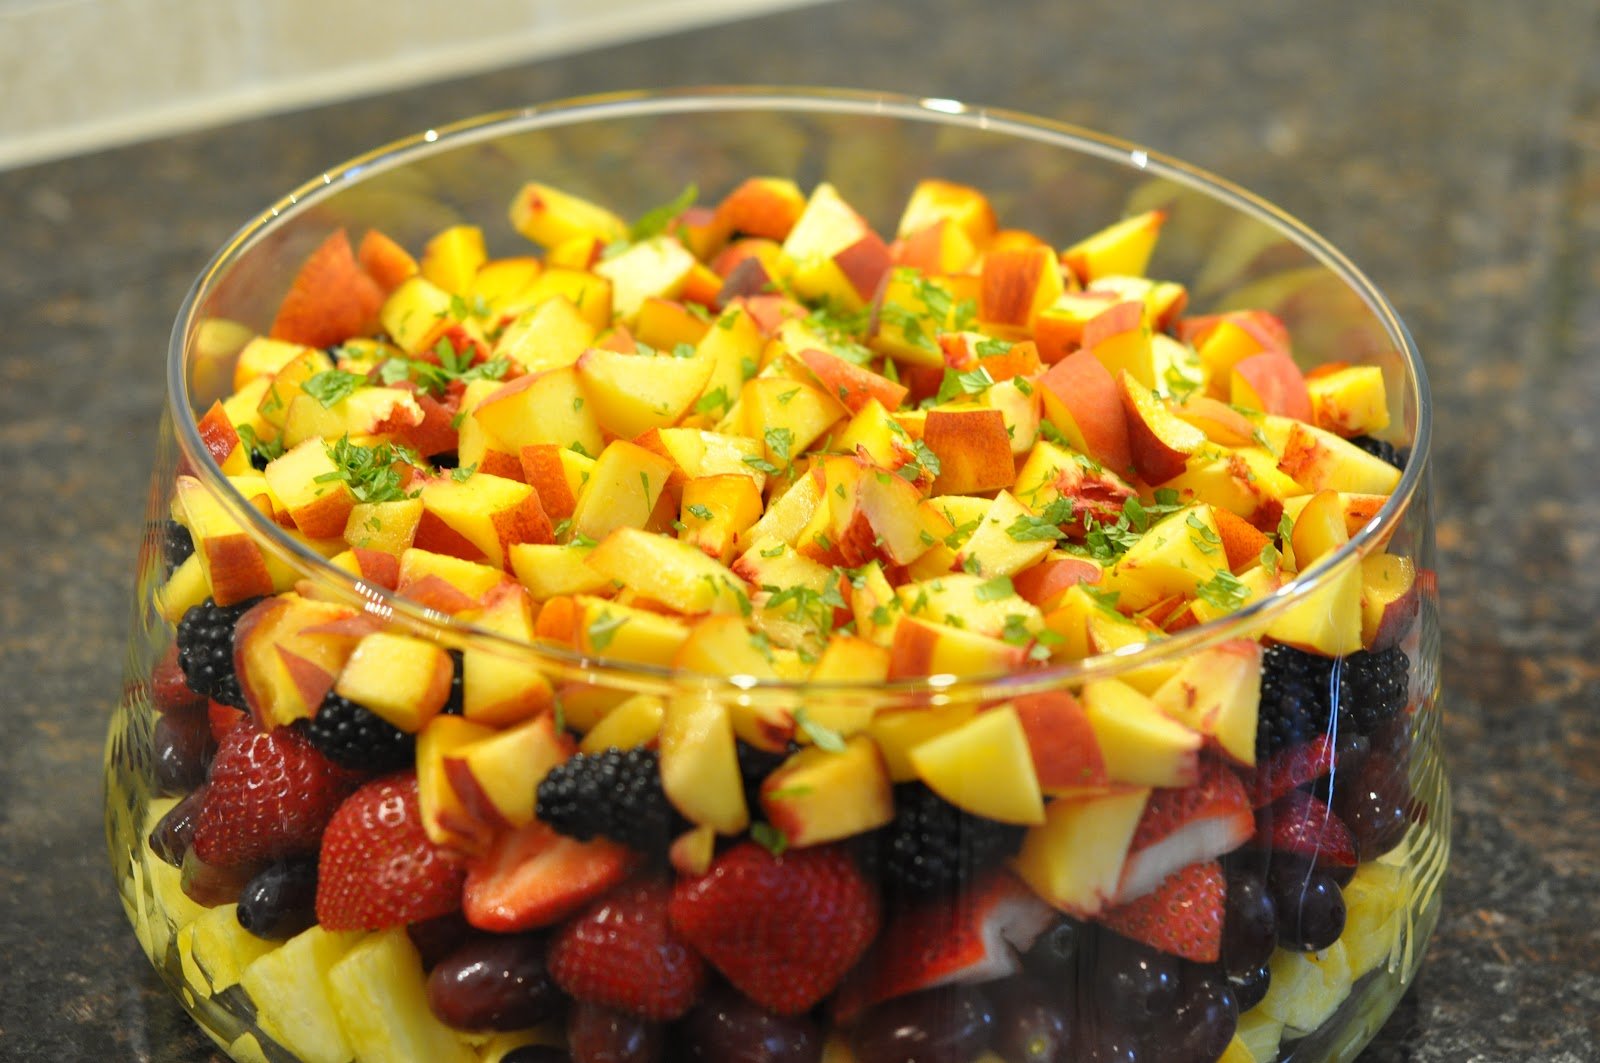 Wholesome Honeyed Fruit Salad: A Sweet Treat for Wellness